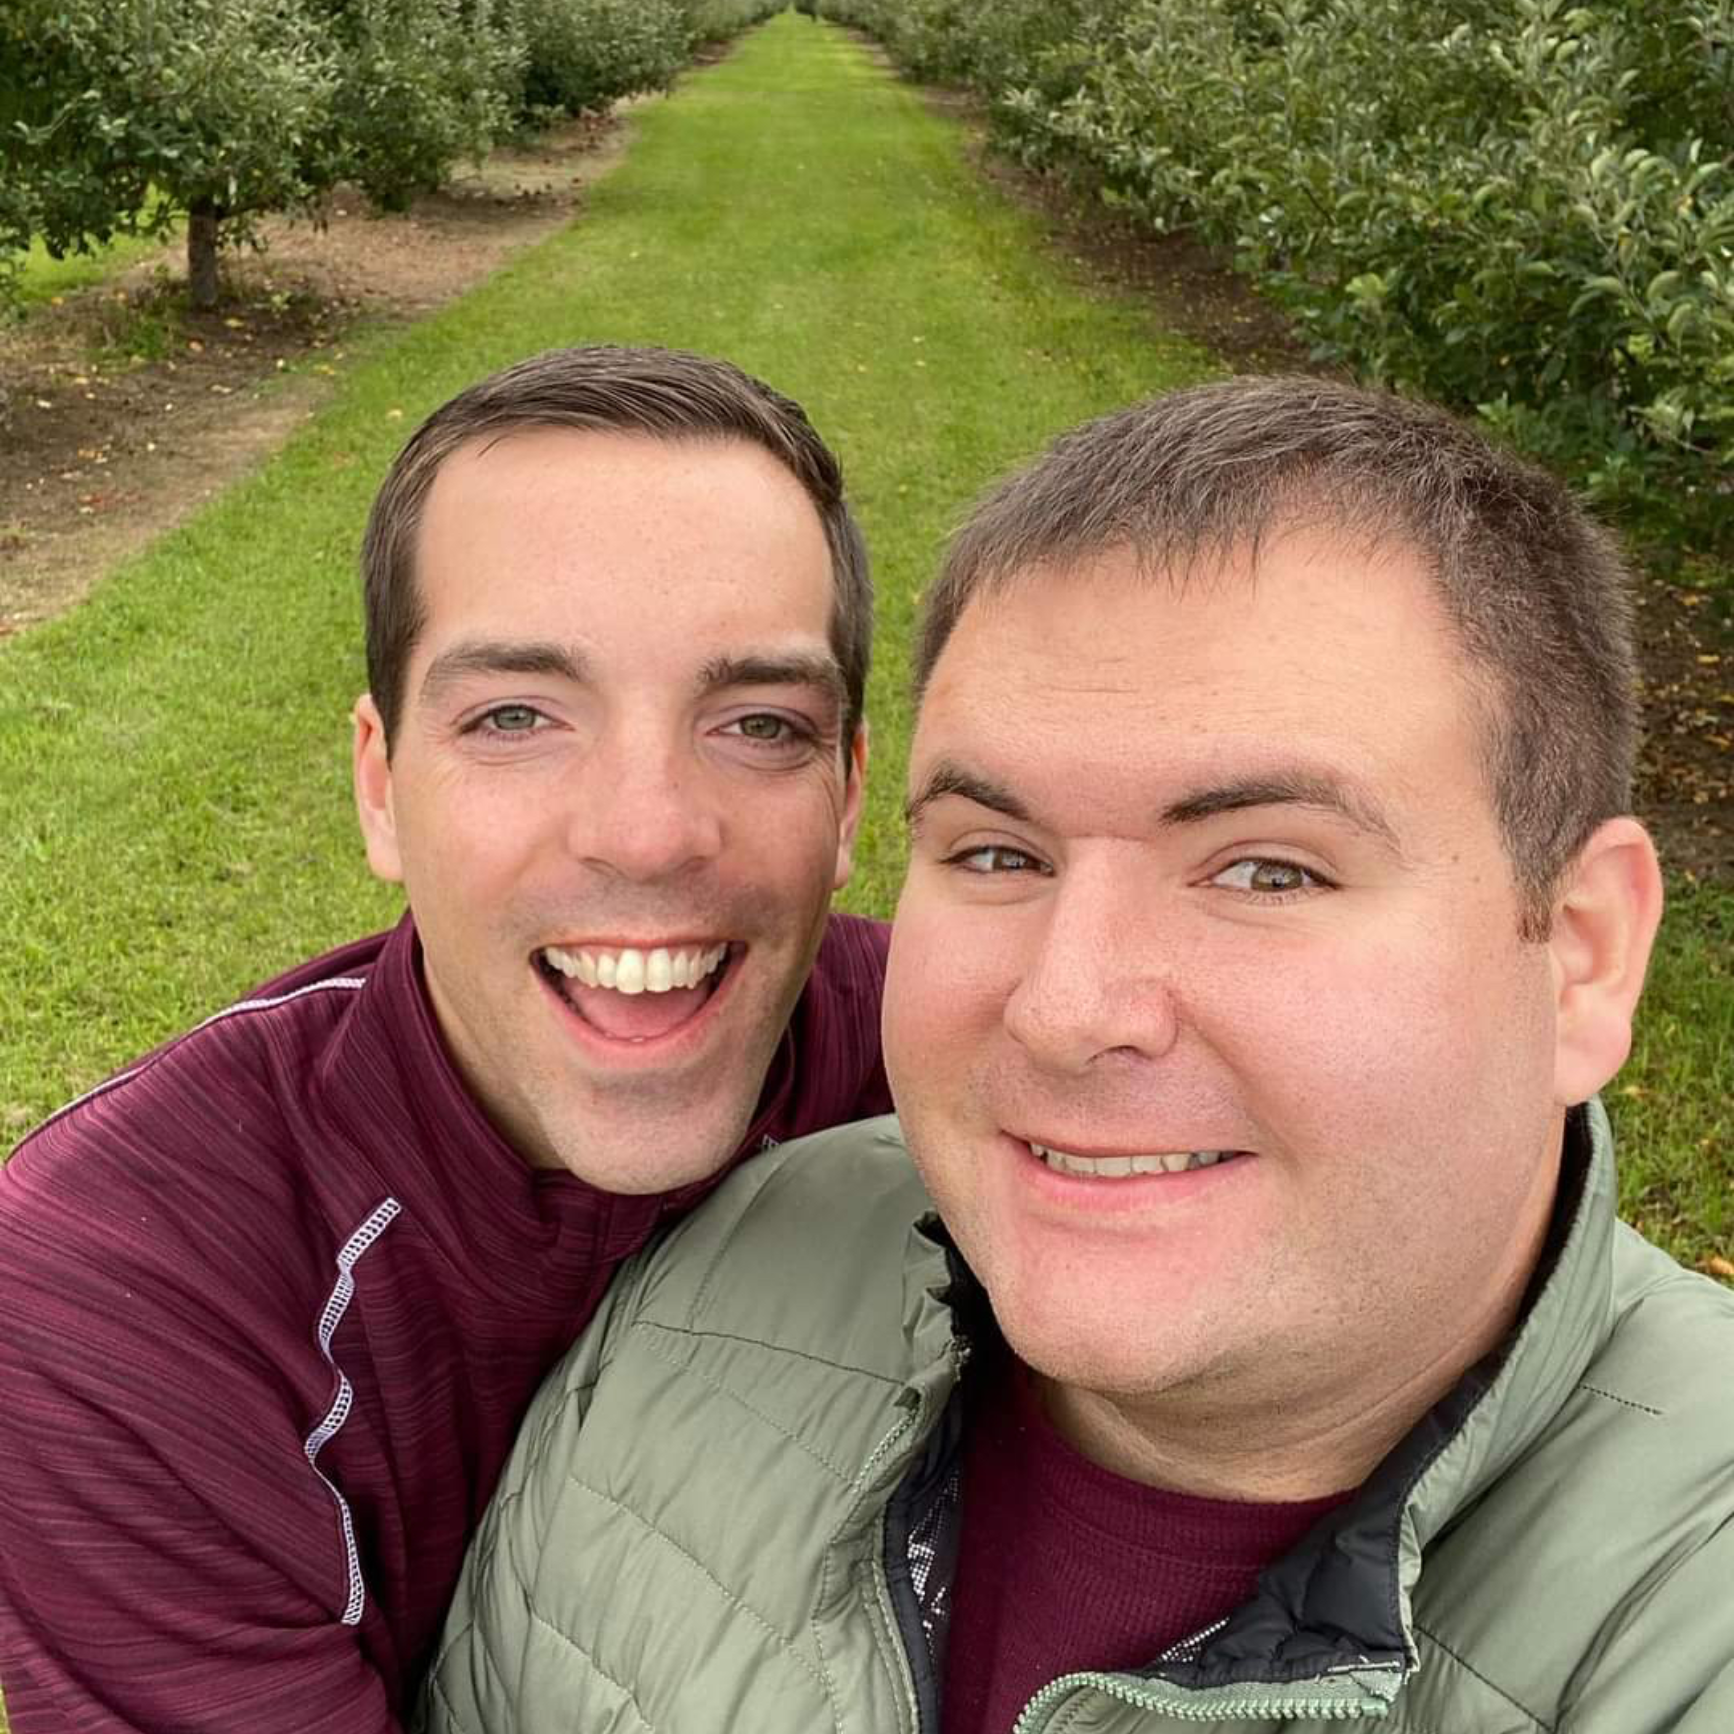 Fall is our favorite season and it isnt fall without a visit to the apple orchard!